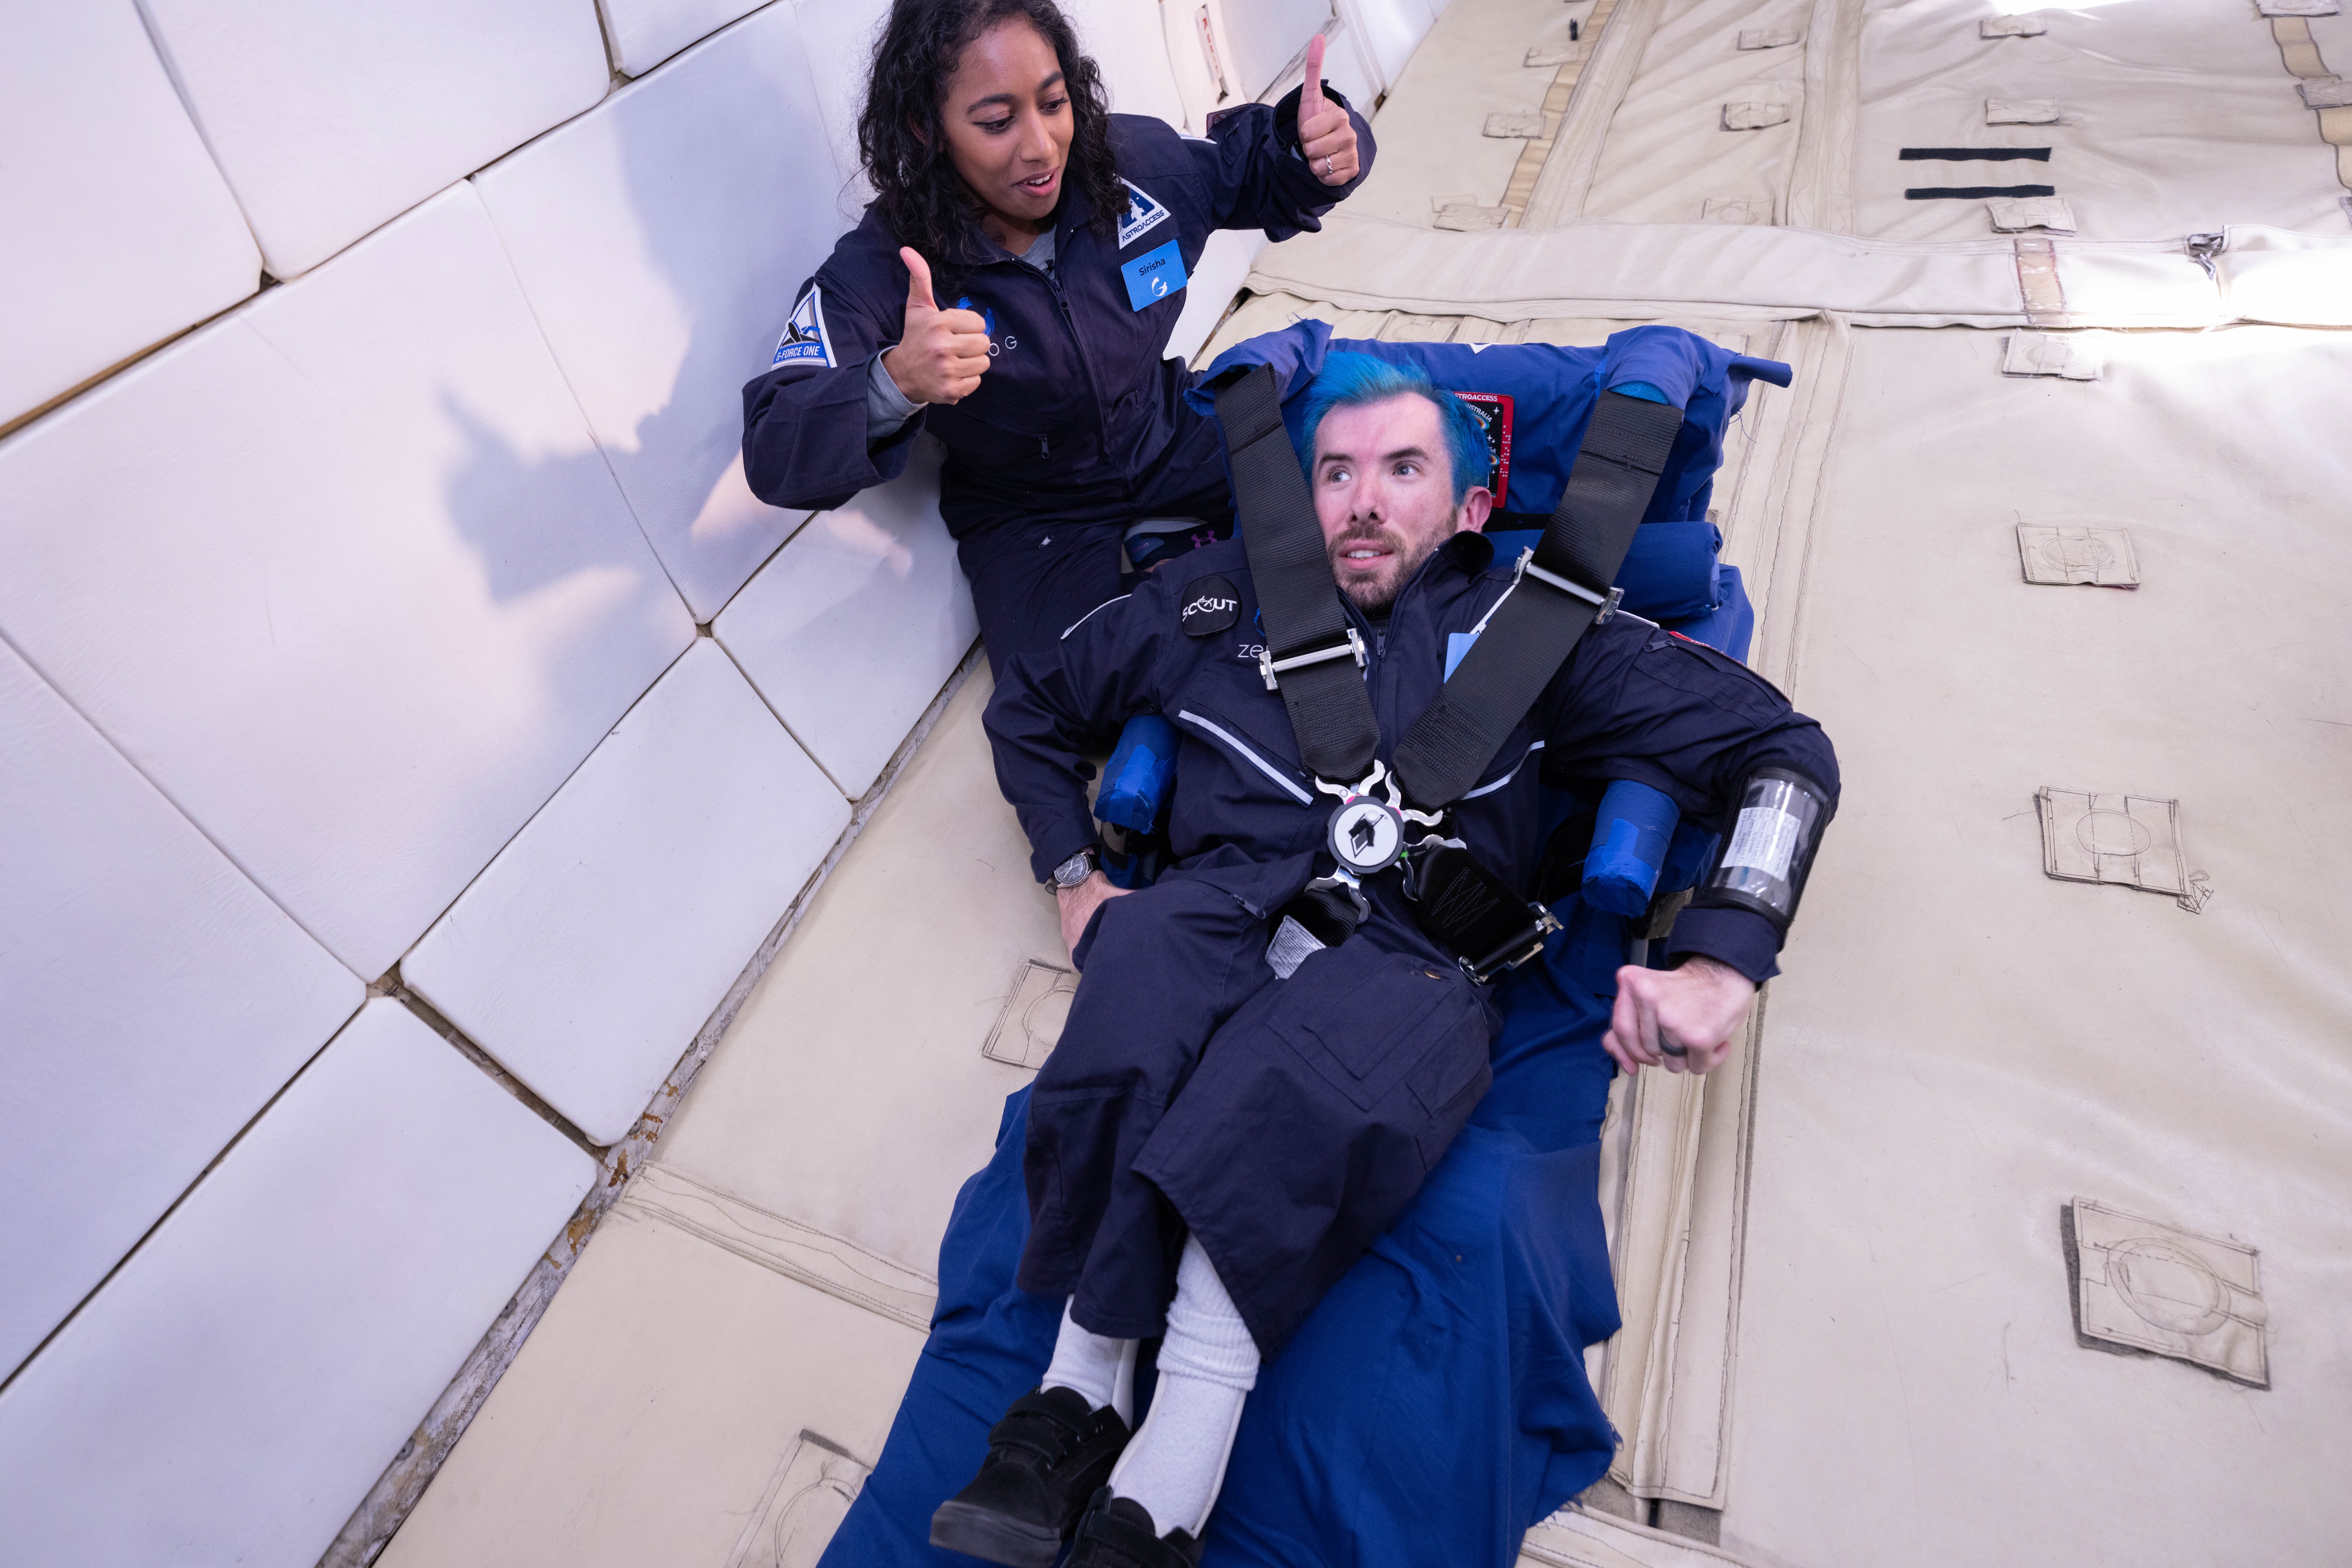 Eric Ingram, a returning flyer from AstroAccess's inaugural 2021 mission, practices getting in and out of a 5-point harness attached to a simulated space capsule seat. He is joined by astronaut and aerospace executive Sirisha Bandla.  (Photo: Tasha Dixon)